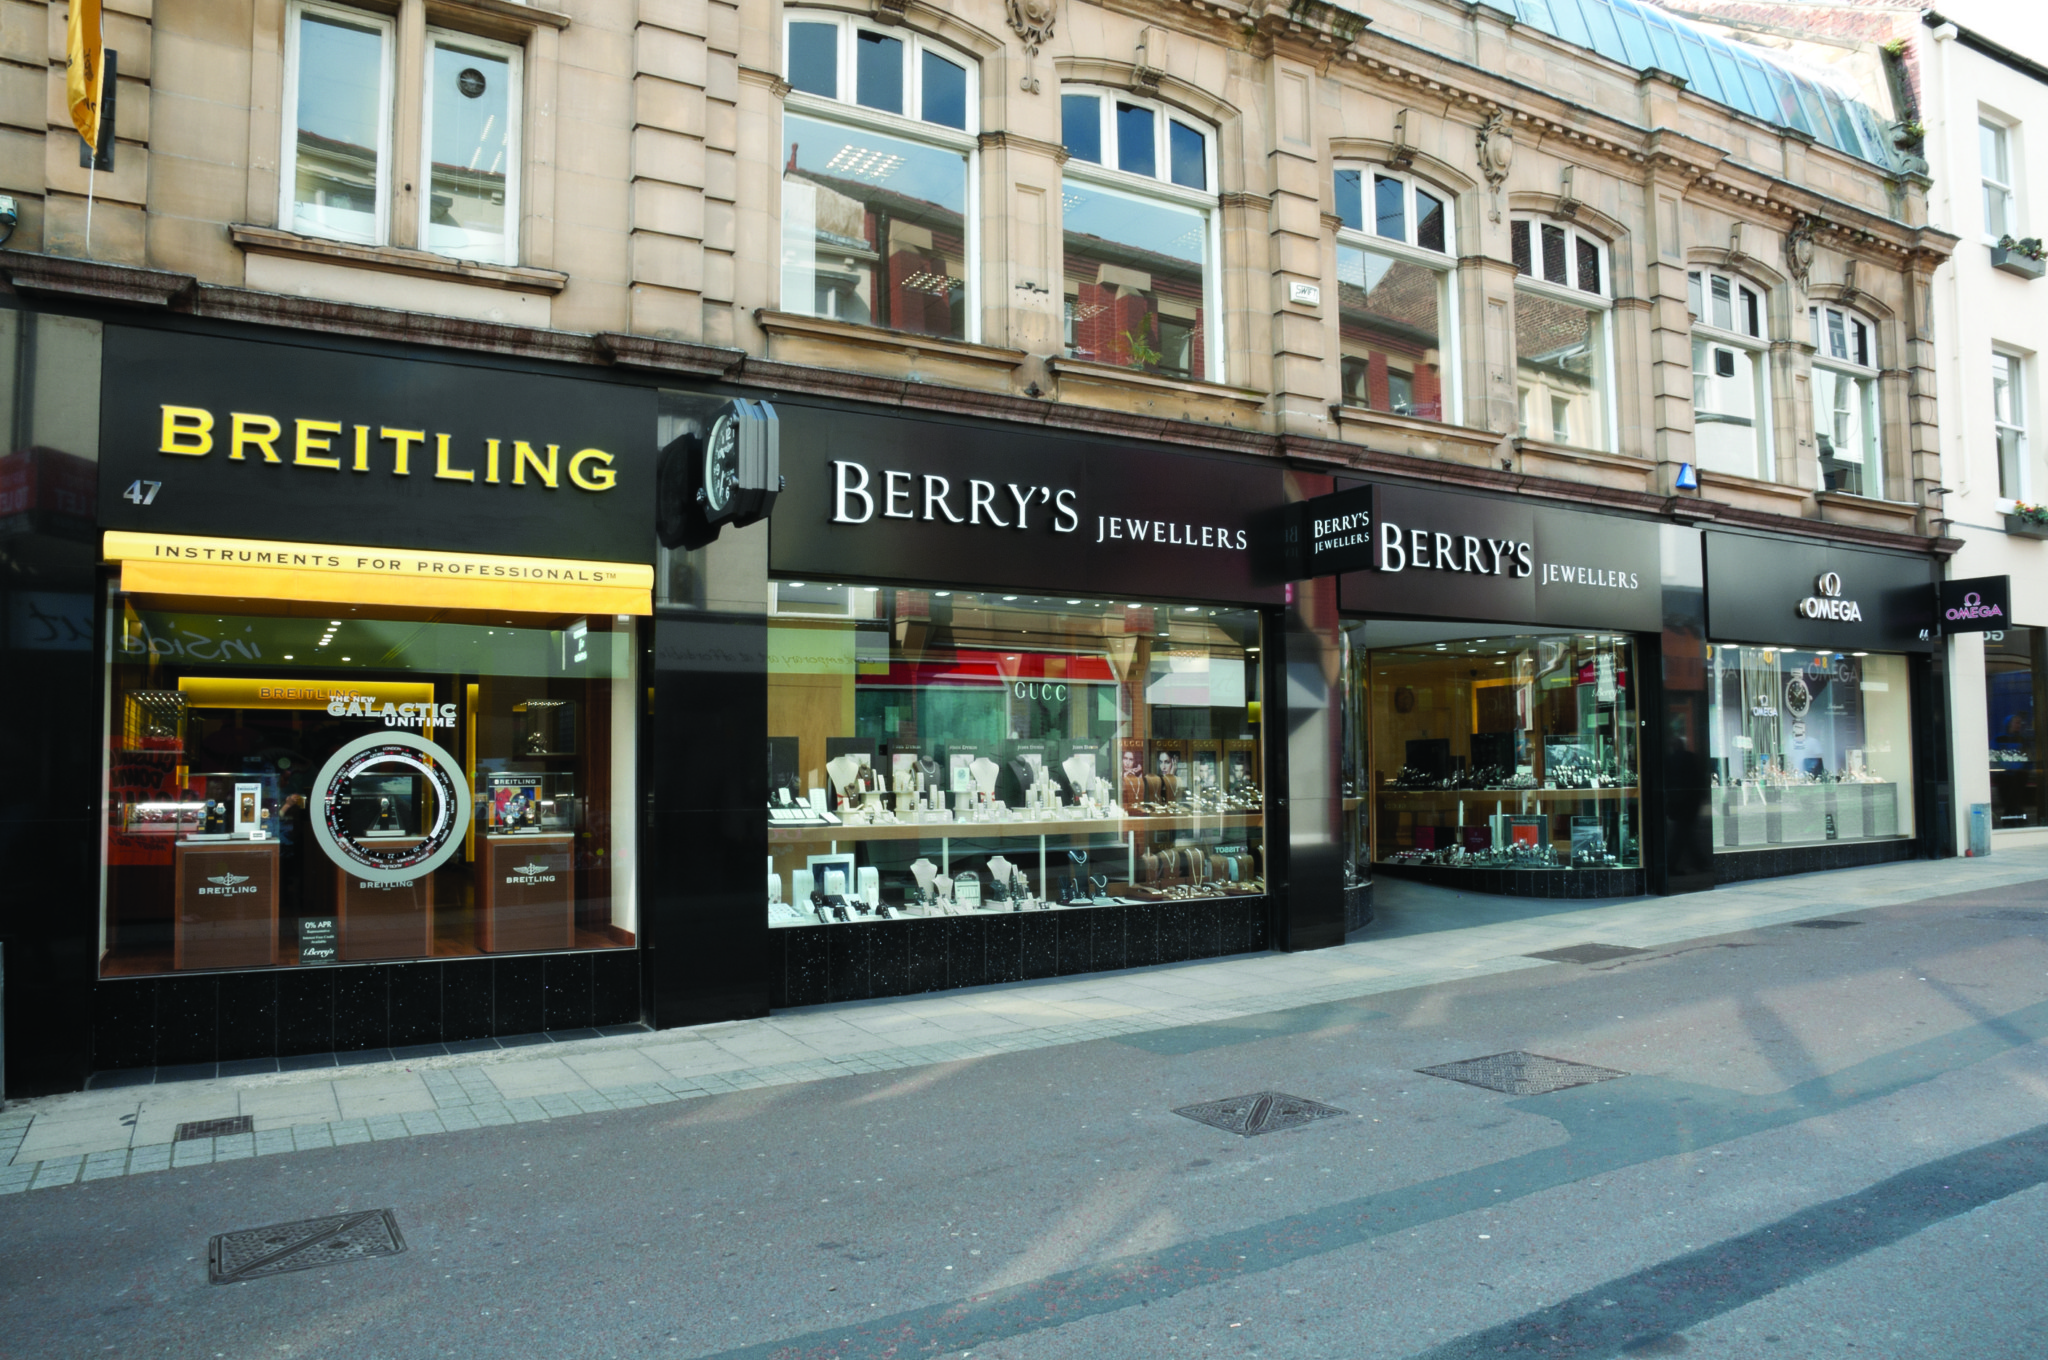 Berry's has created a parade of luxury monobrand store fronts on commercial street in leeds. Rivals have rolex and patek philippe boutiques on the same street, turning it into a local version of london's bond street.